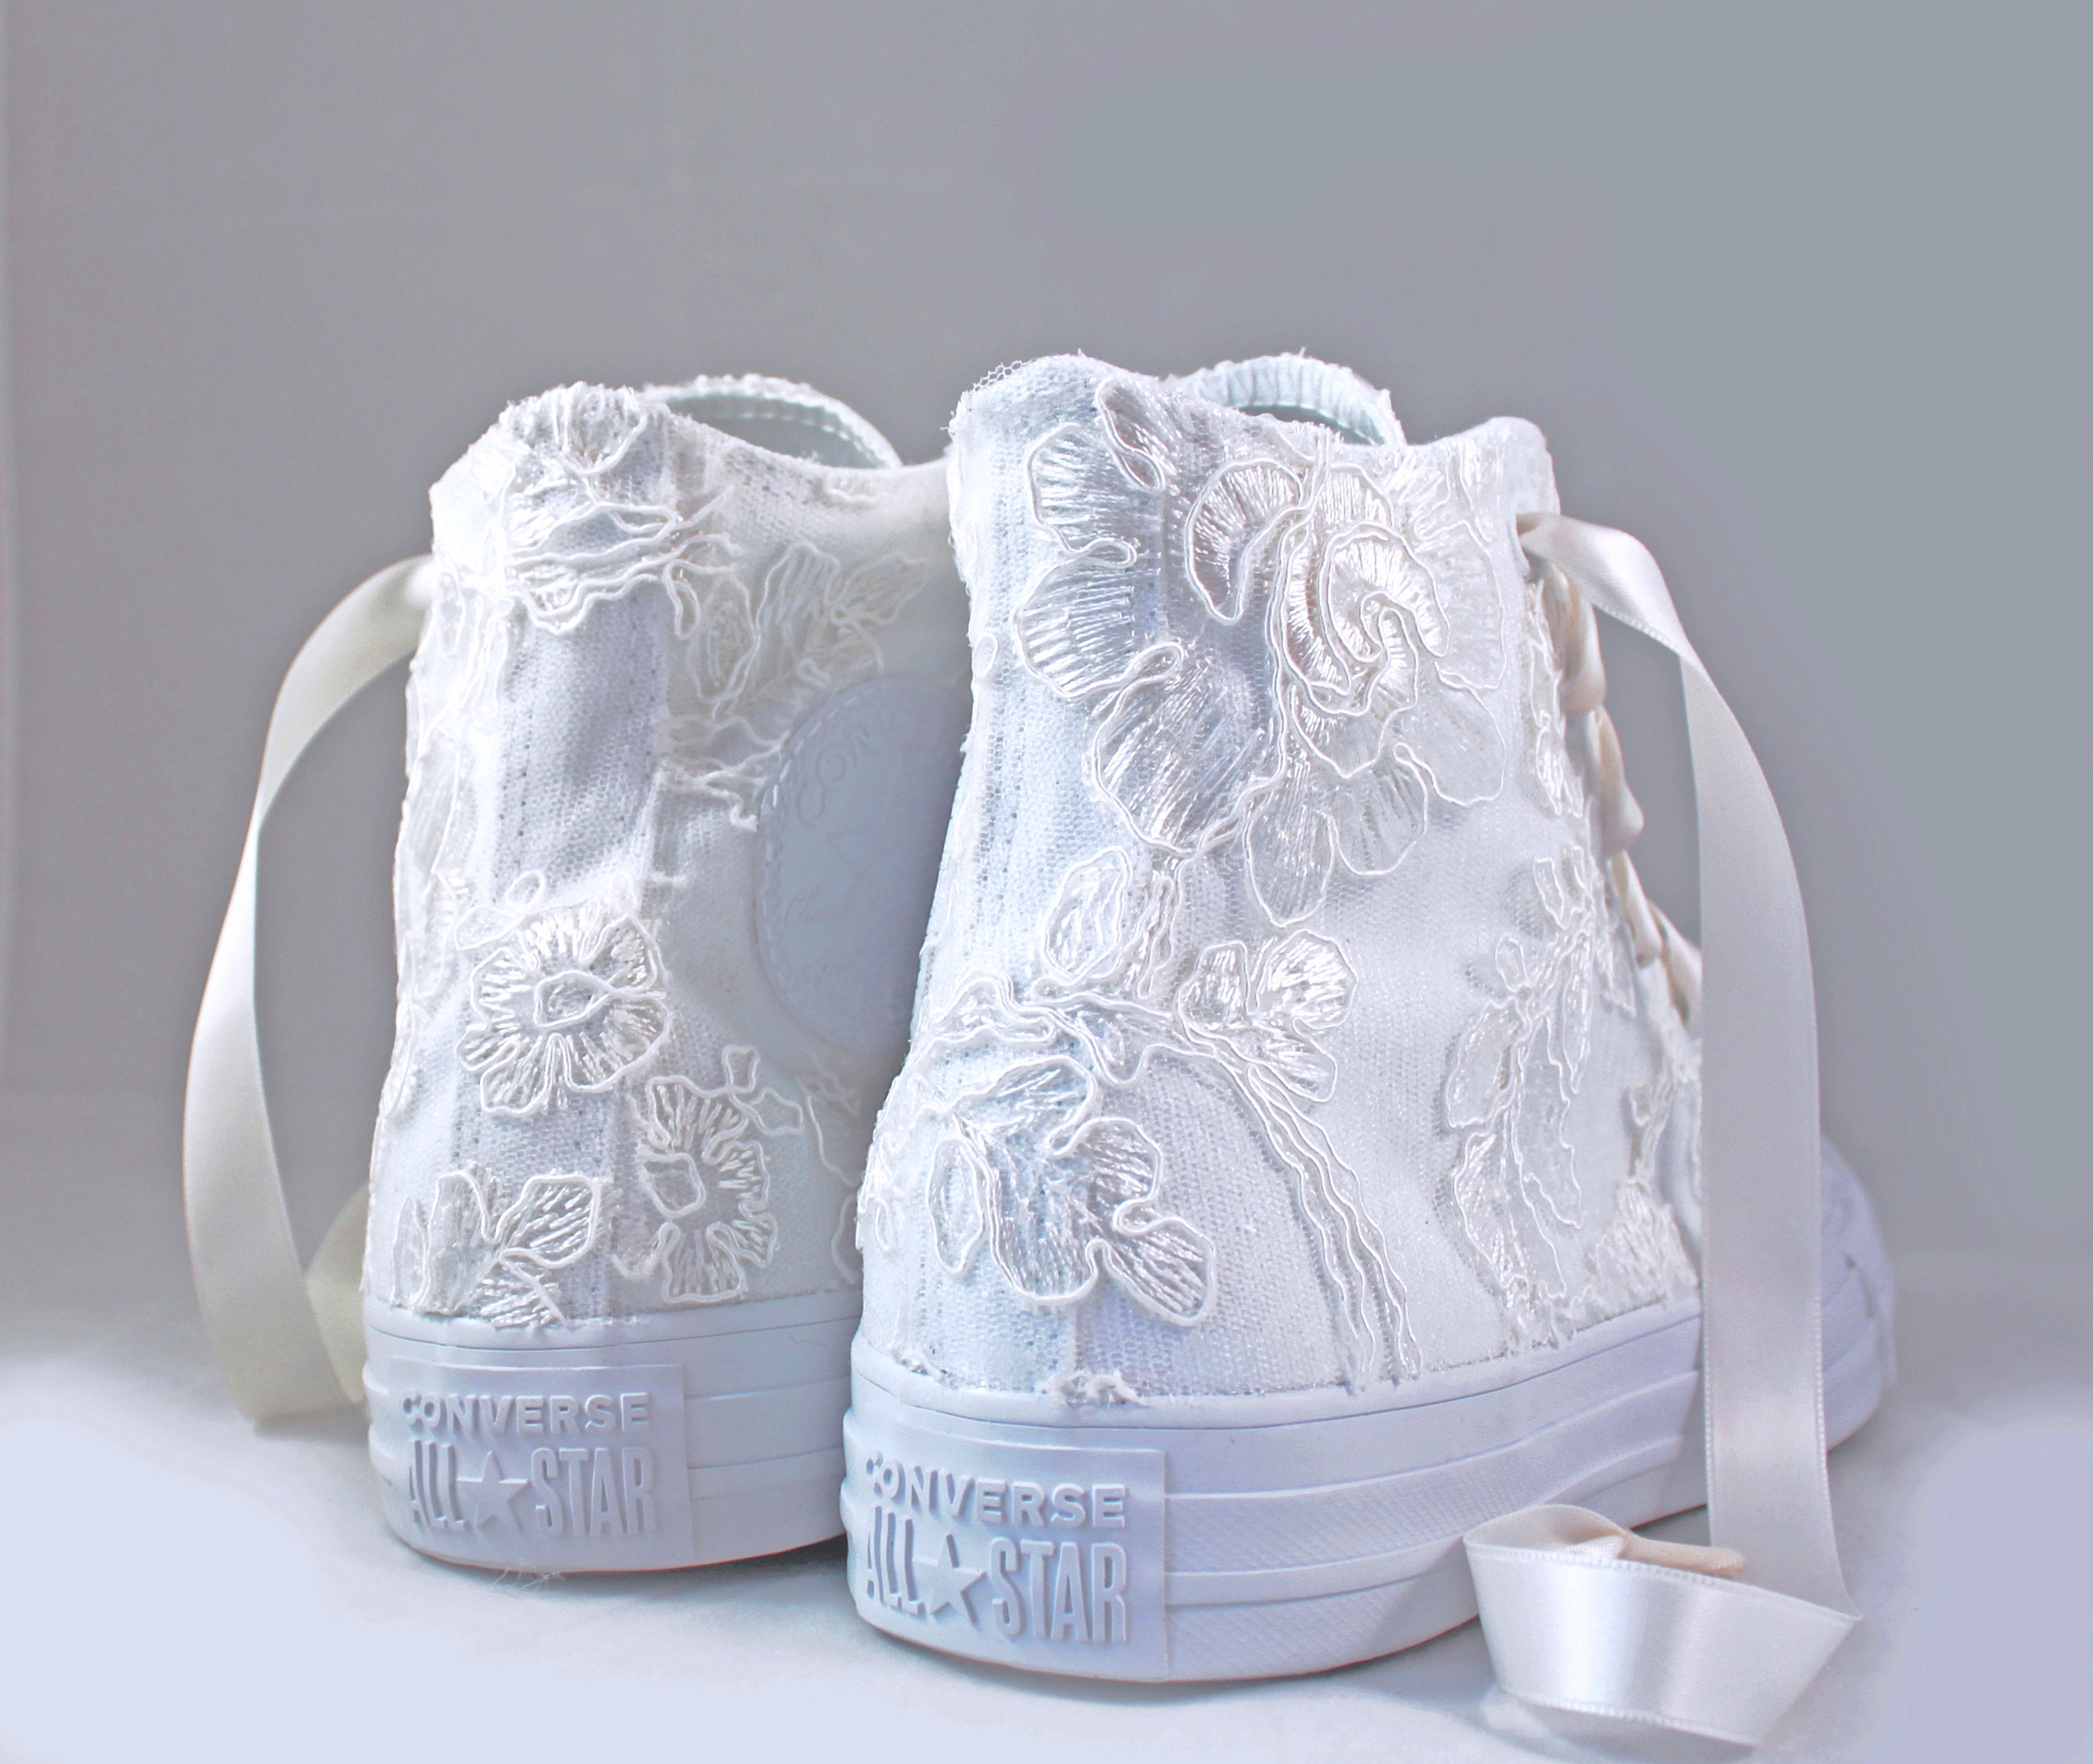 converse chuck taylor lace high top sneaker